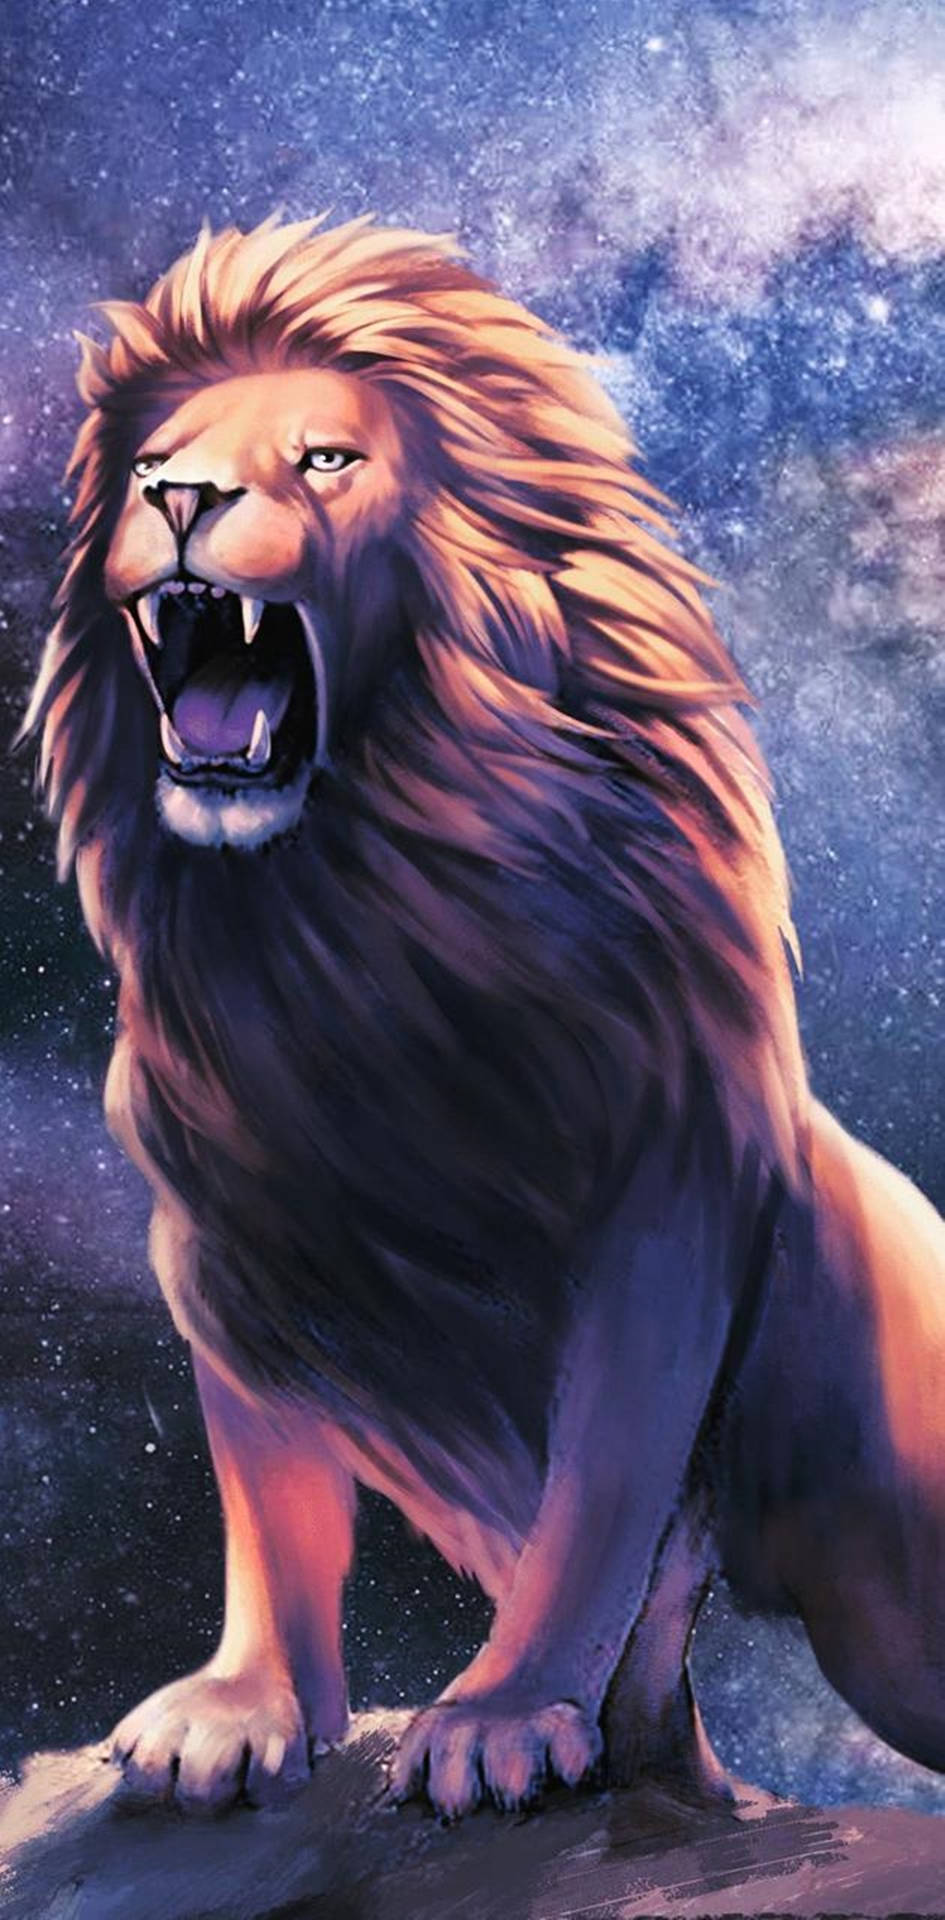 Angry Roaring Lion Galaxy Background